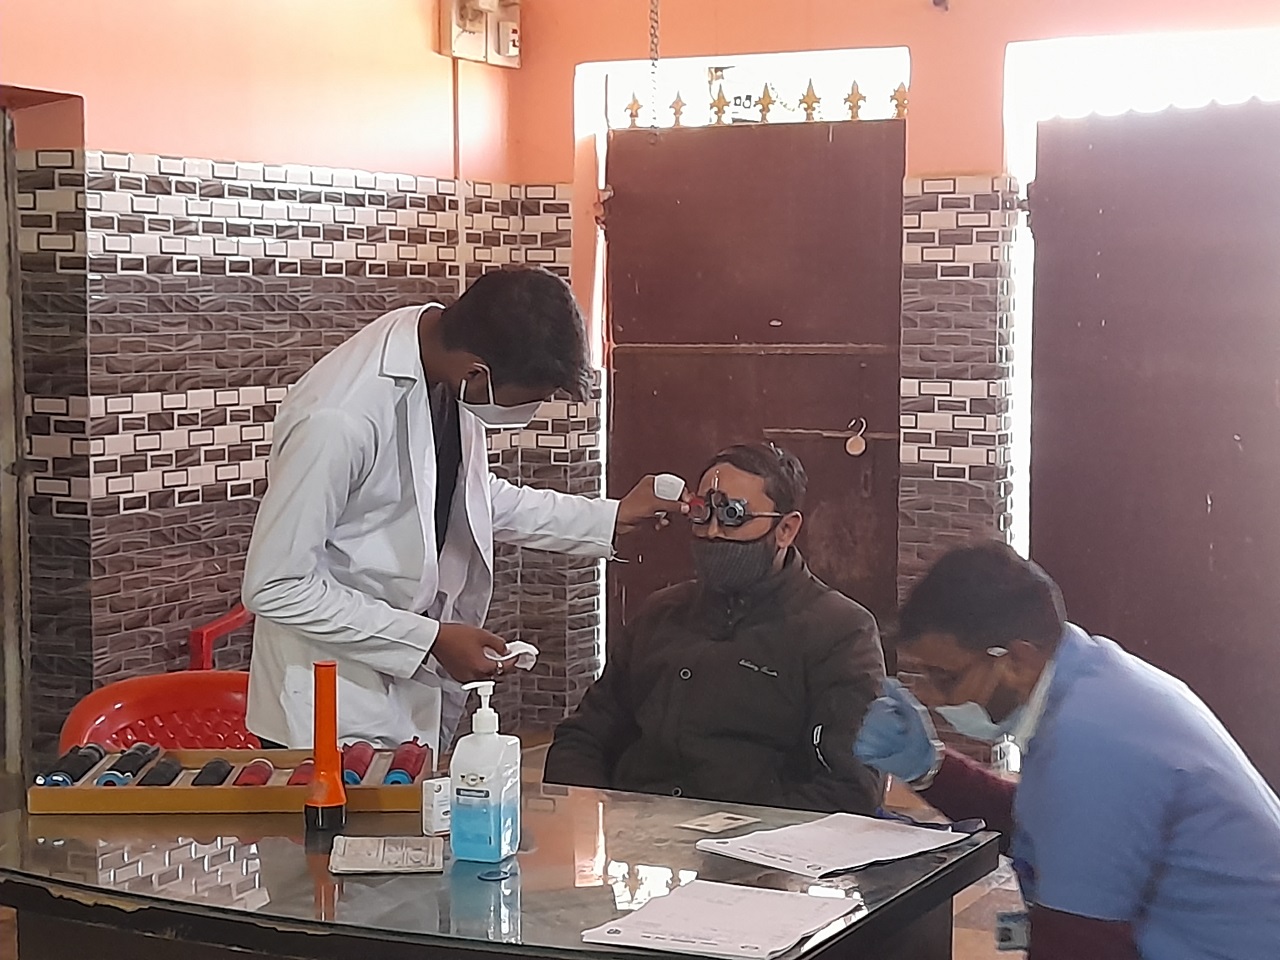 Dr. Bharti Kashyap: Cataract Screening and Surgery Camp with Camp with Patel Niwash, Chatakpur, Ranchi on 27th January 2022